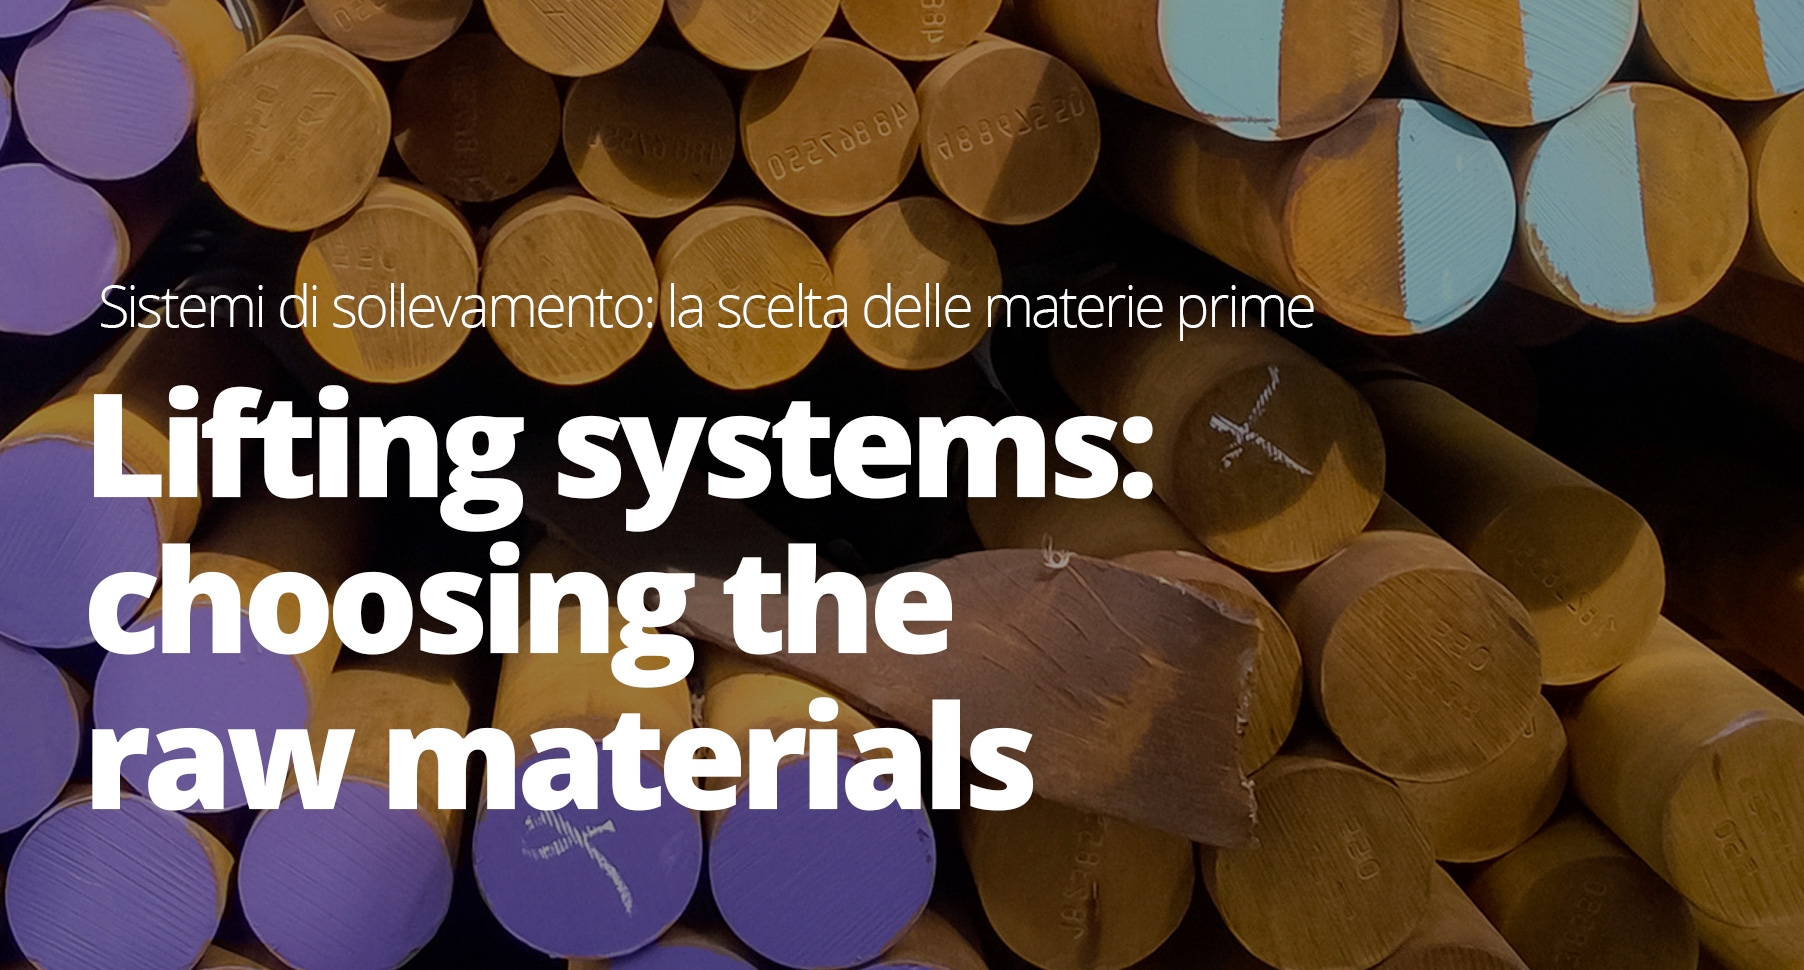 Raw materials for the production of lifting systems